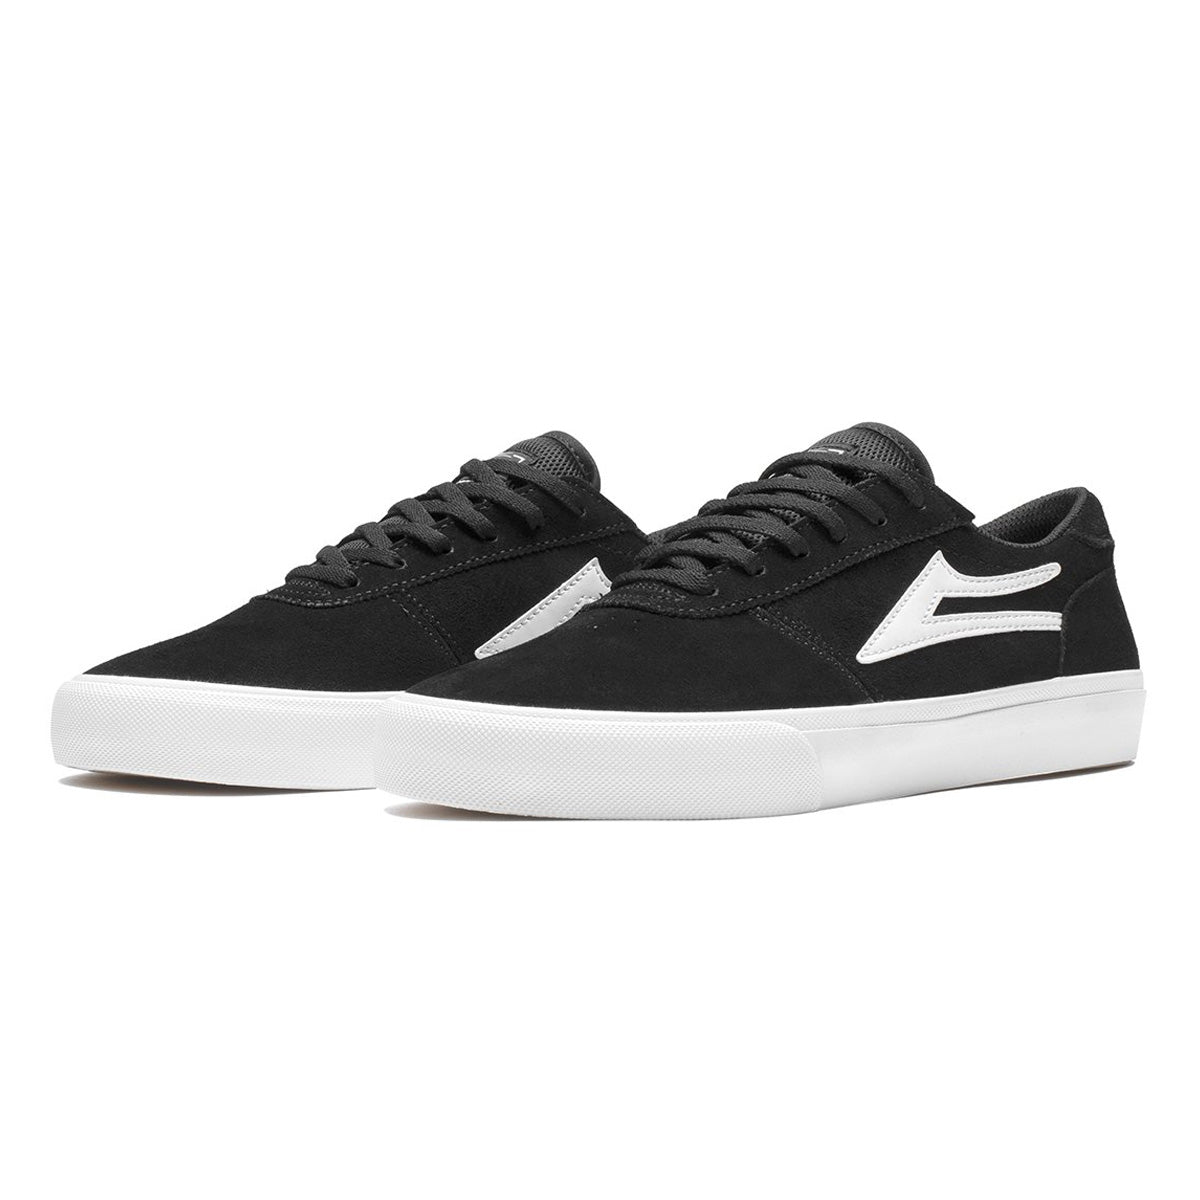 Black and white suede lowtop shoes from Lakai. Pay With Klarna and Clearpay.